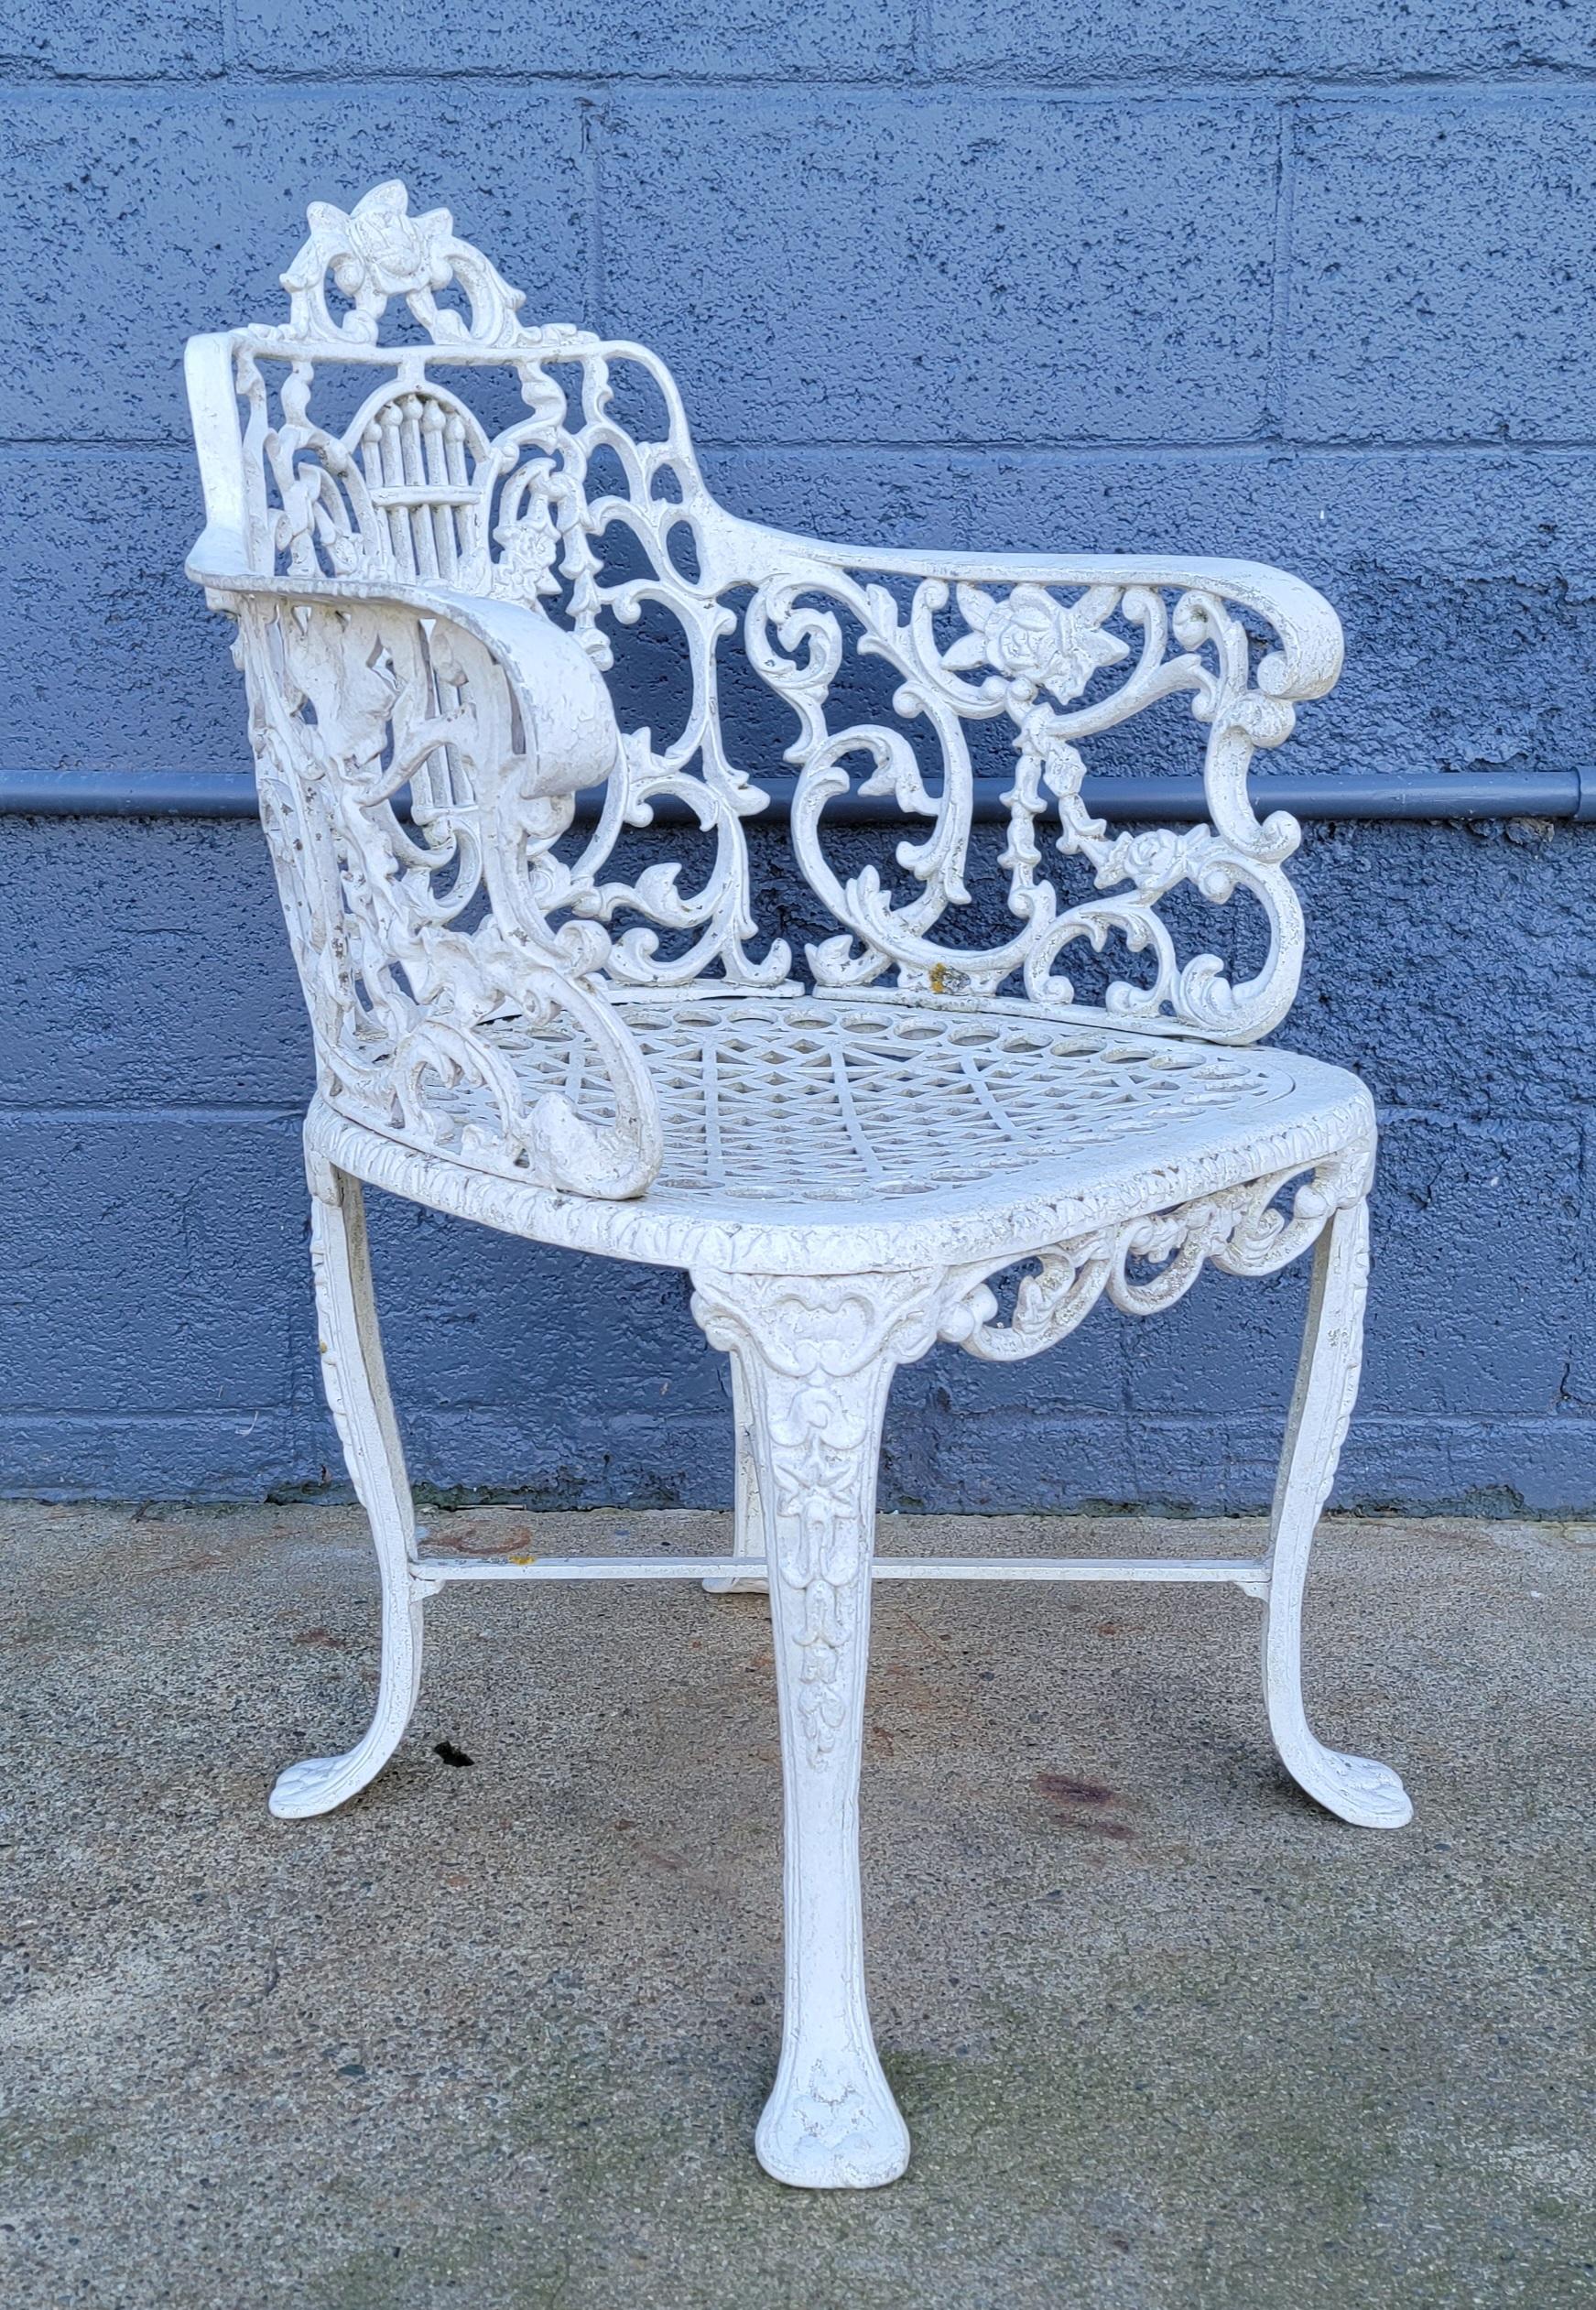 A set of 4 cast aluminum garden chairs in the manner of Robert Wood. Floral and lyre design, removable seats. Mid to late 20th century. Original white paint with patina; light wear, dust and dirt from outside use. Structurally very solid. Arm height